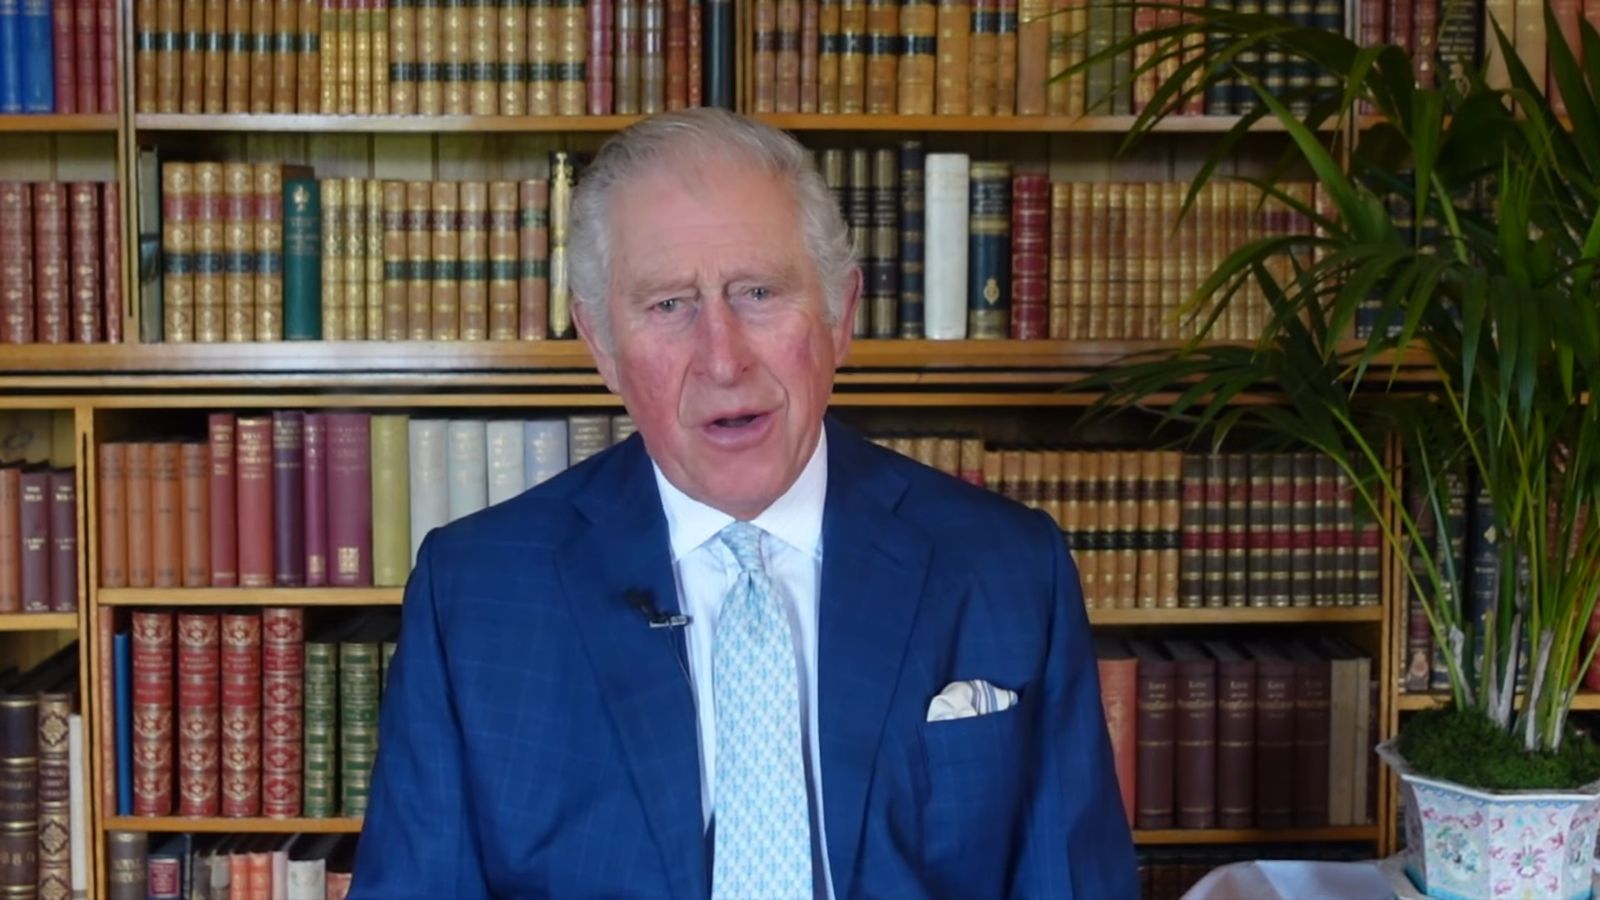 queen-elizabeth-fury-monarch-deeply-upset-with-prince-charles-after-racism-scandal-erupted-forced-to-do-damage-control